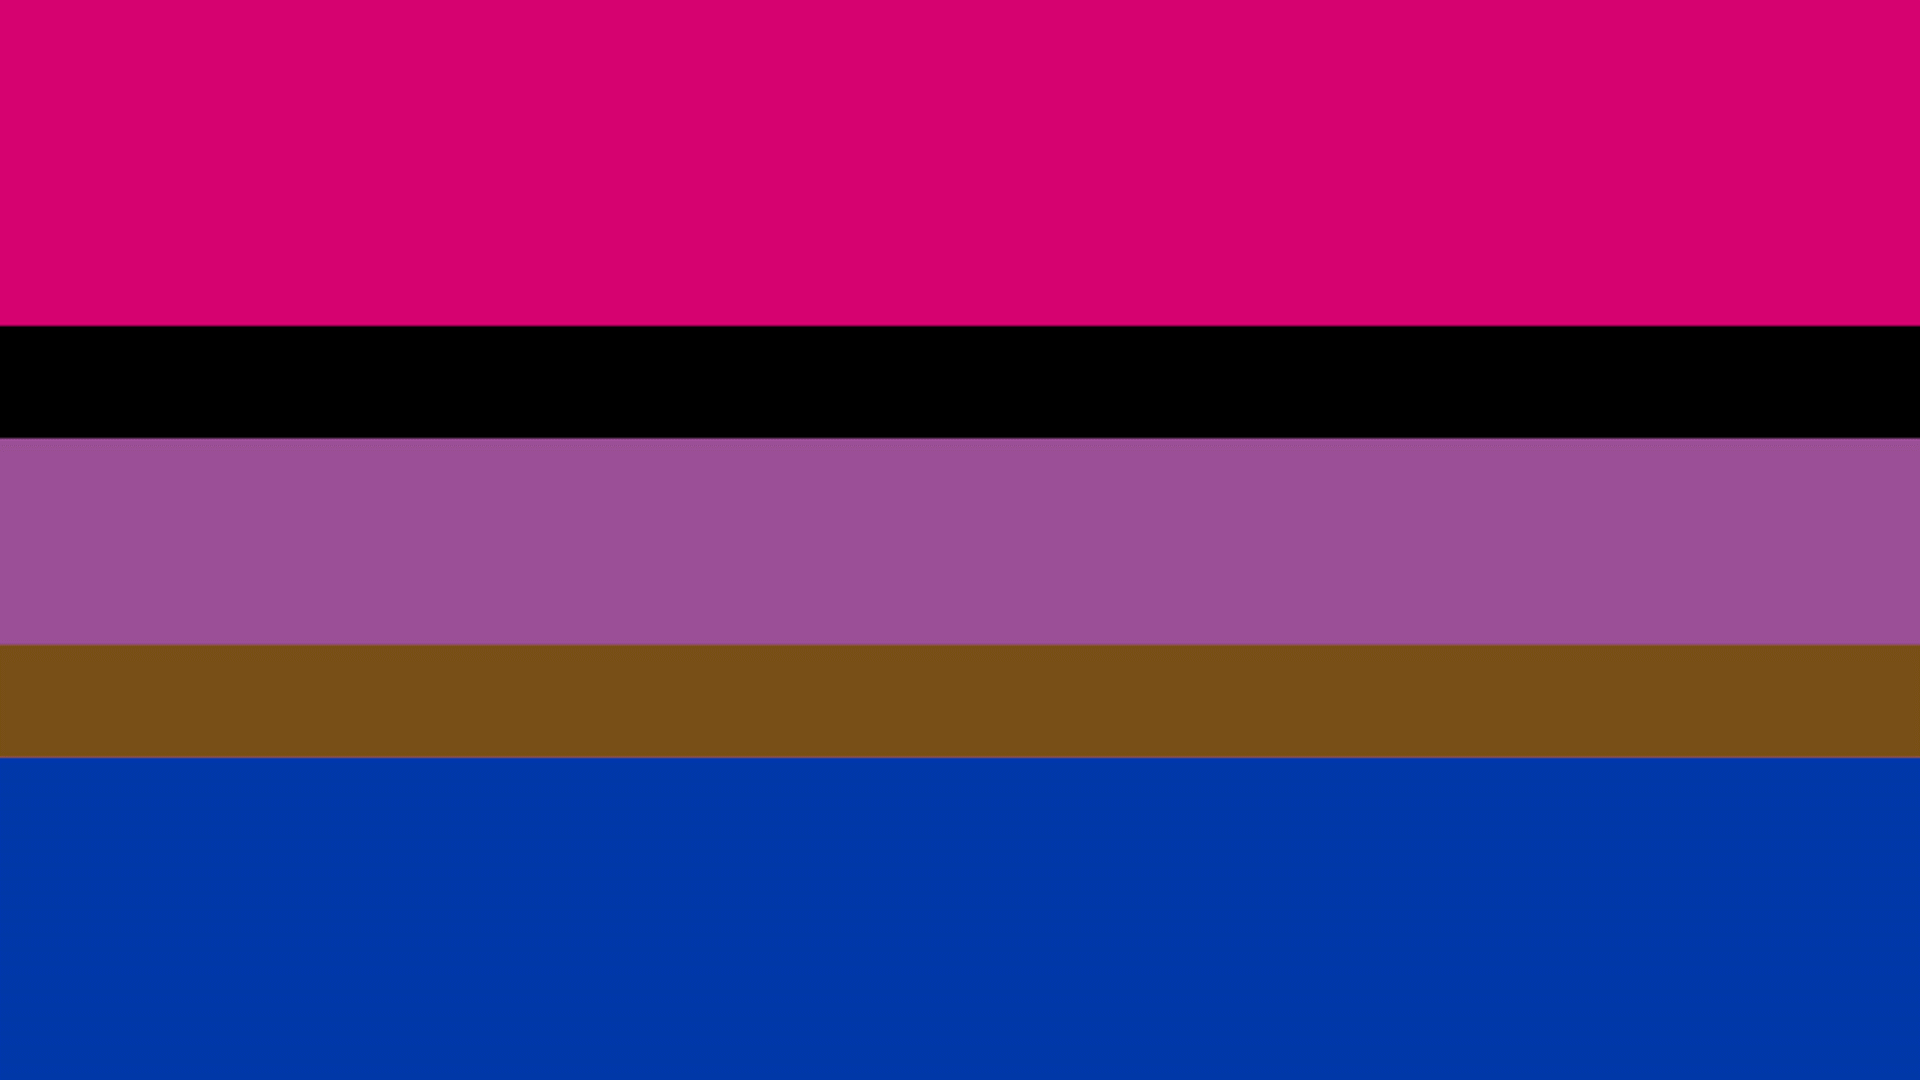 A version of the Bisexual Flag, with extra stripes inspired by the Philadelphia Pride Flag, free to use